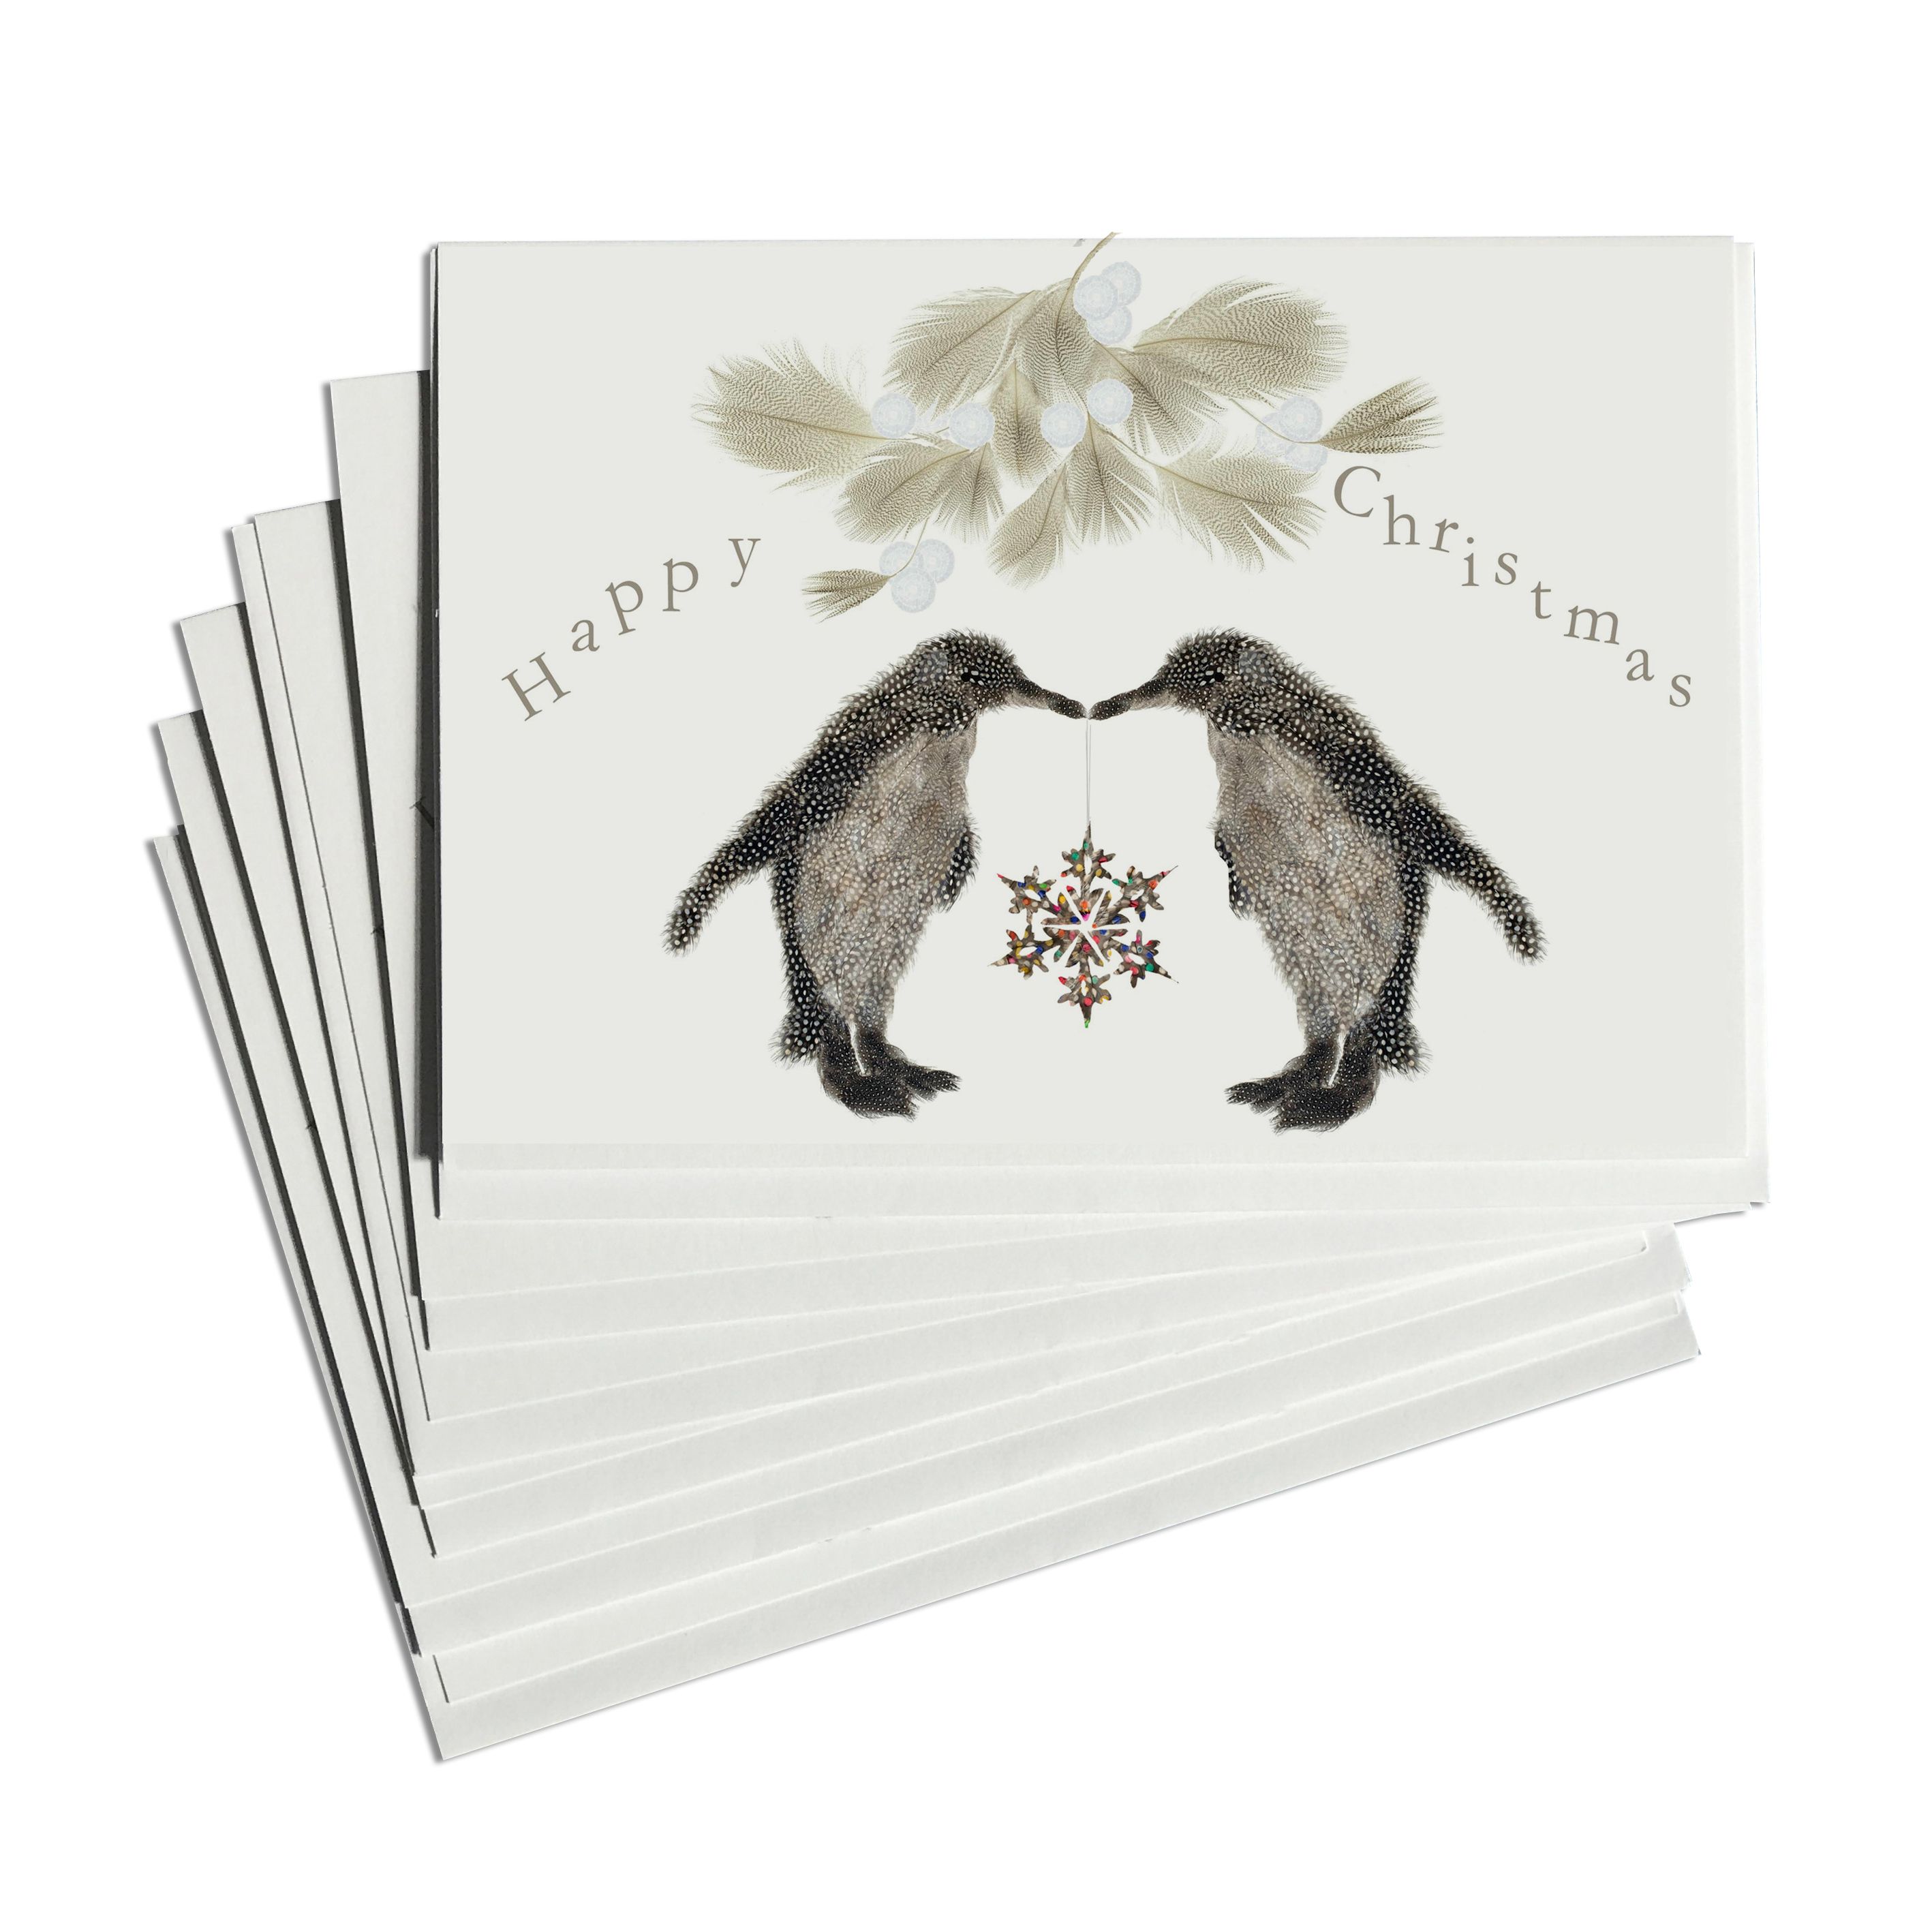 STATIONERY: BOOKS, XMAS CARDS, CARD BOXES & WRAP